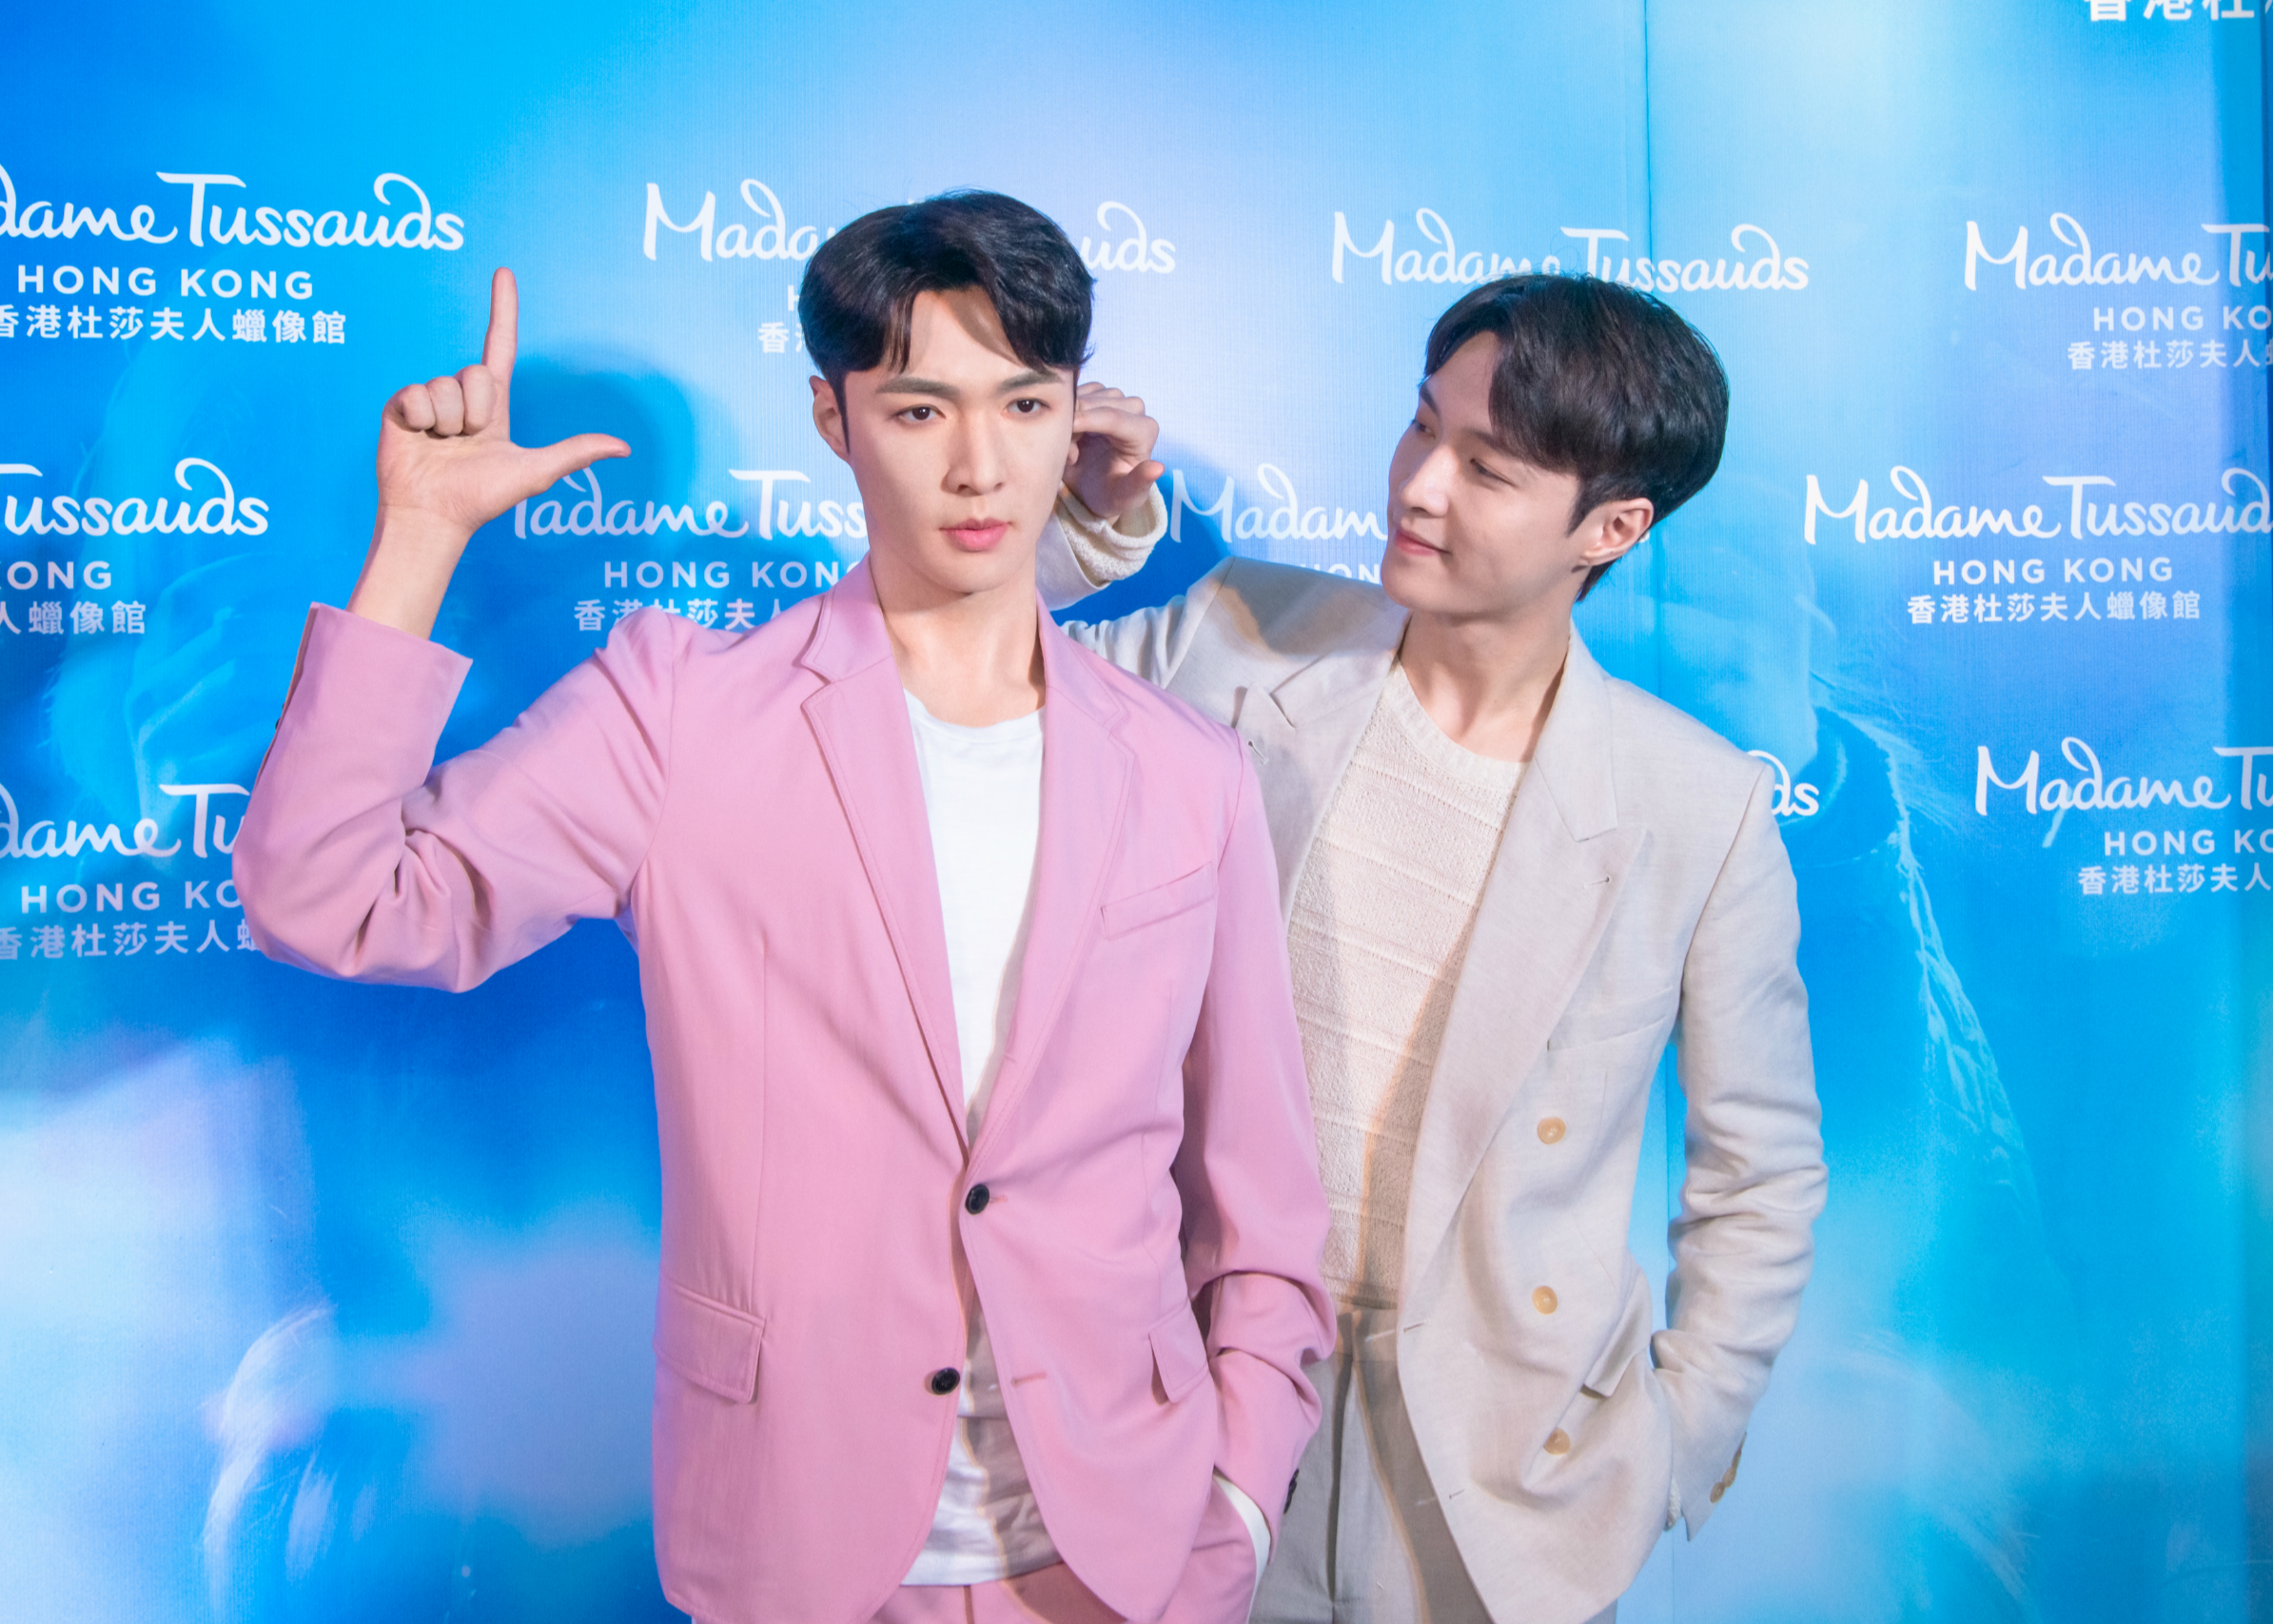 Lay Zhang with his wax figure